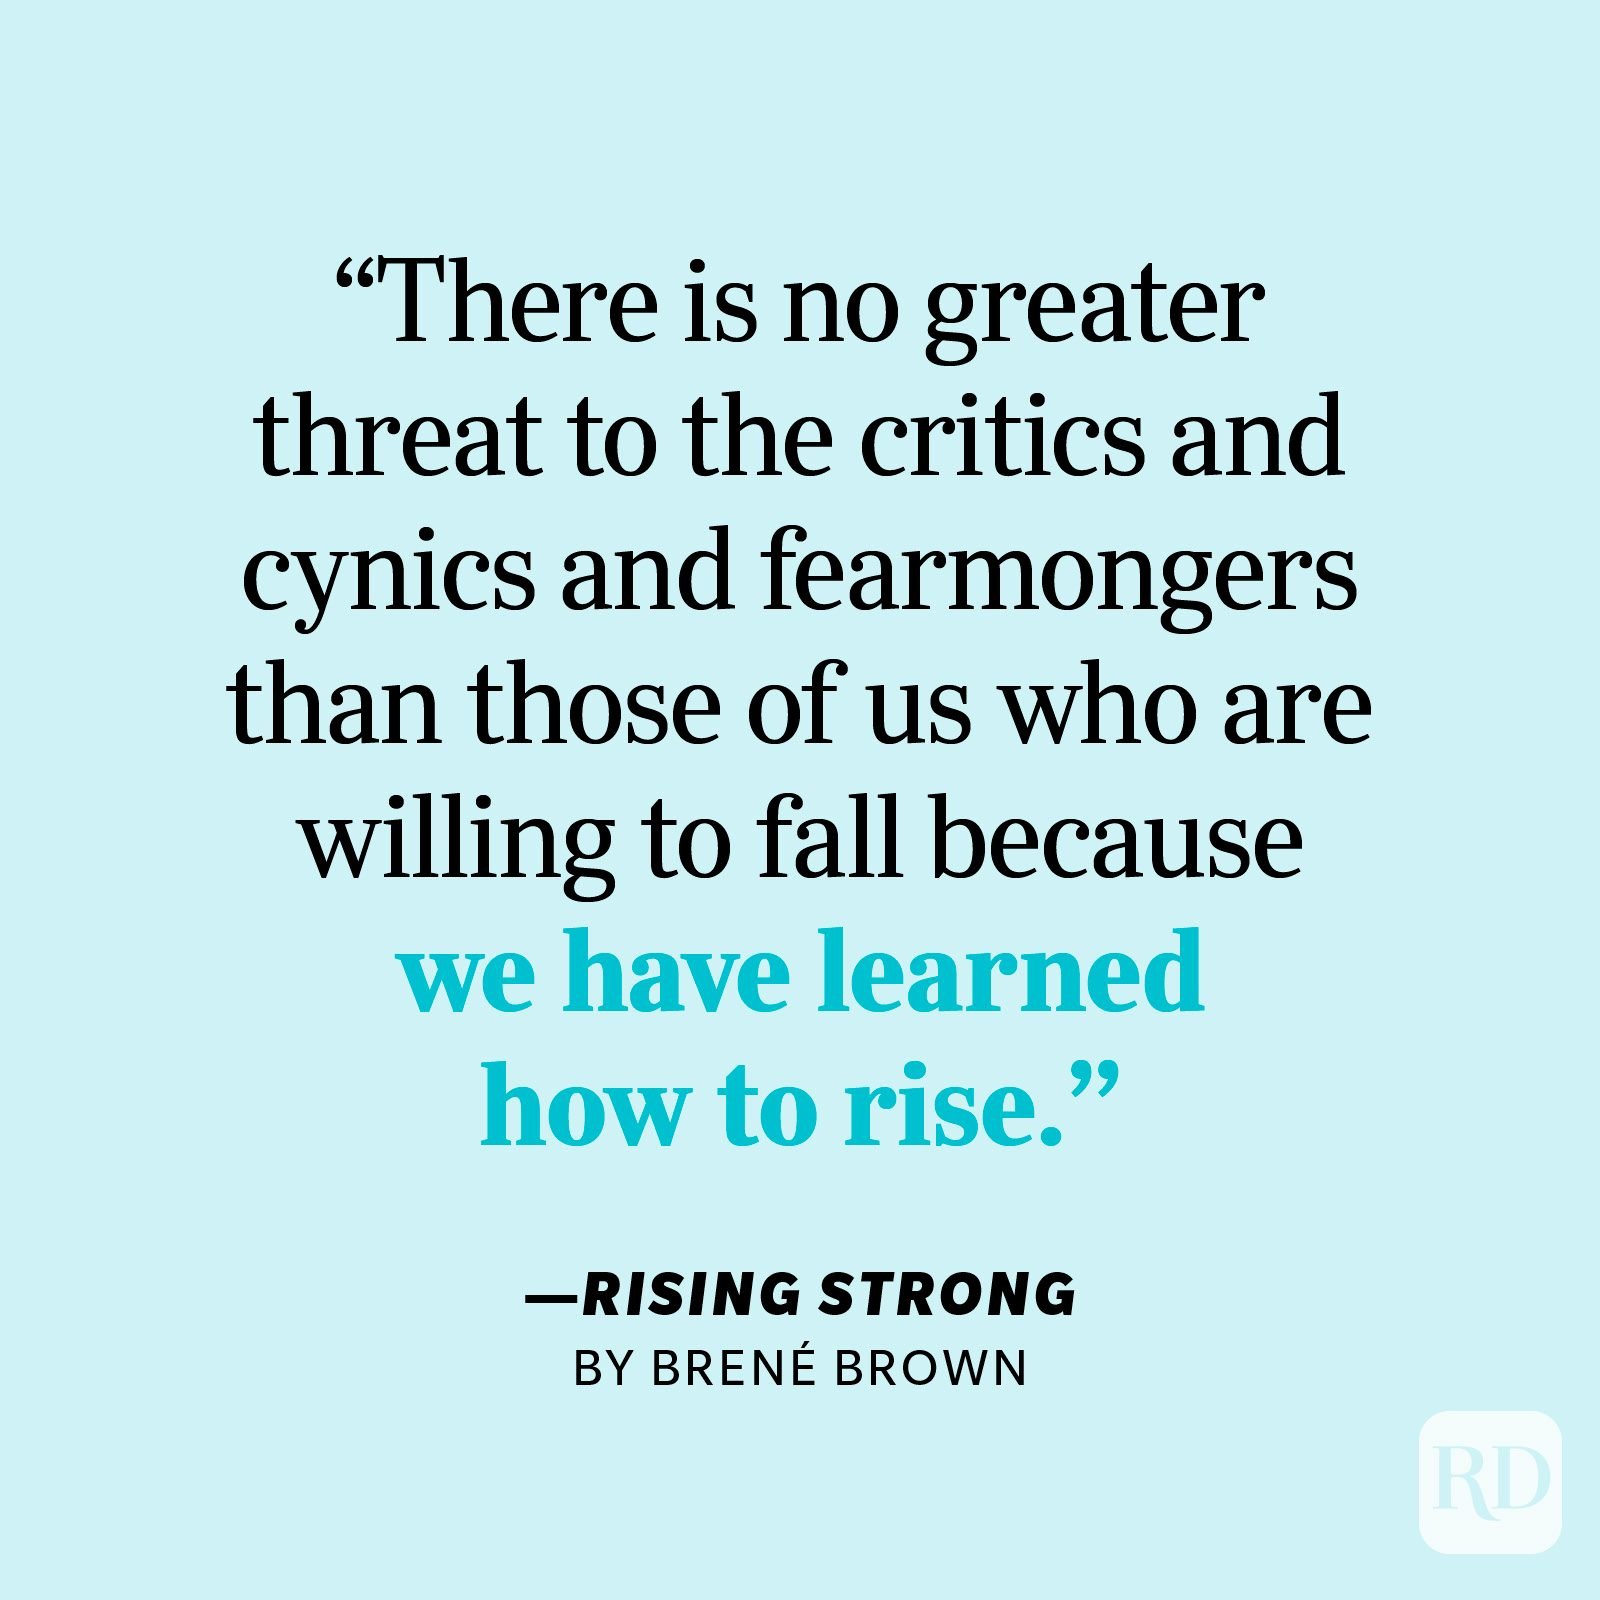 Rising Strong by Brené Brown "There is no greater threat to the critics and cynics and fearmongers than those of us who are willing to fall because we have learned how to rise."